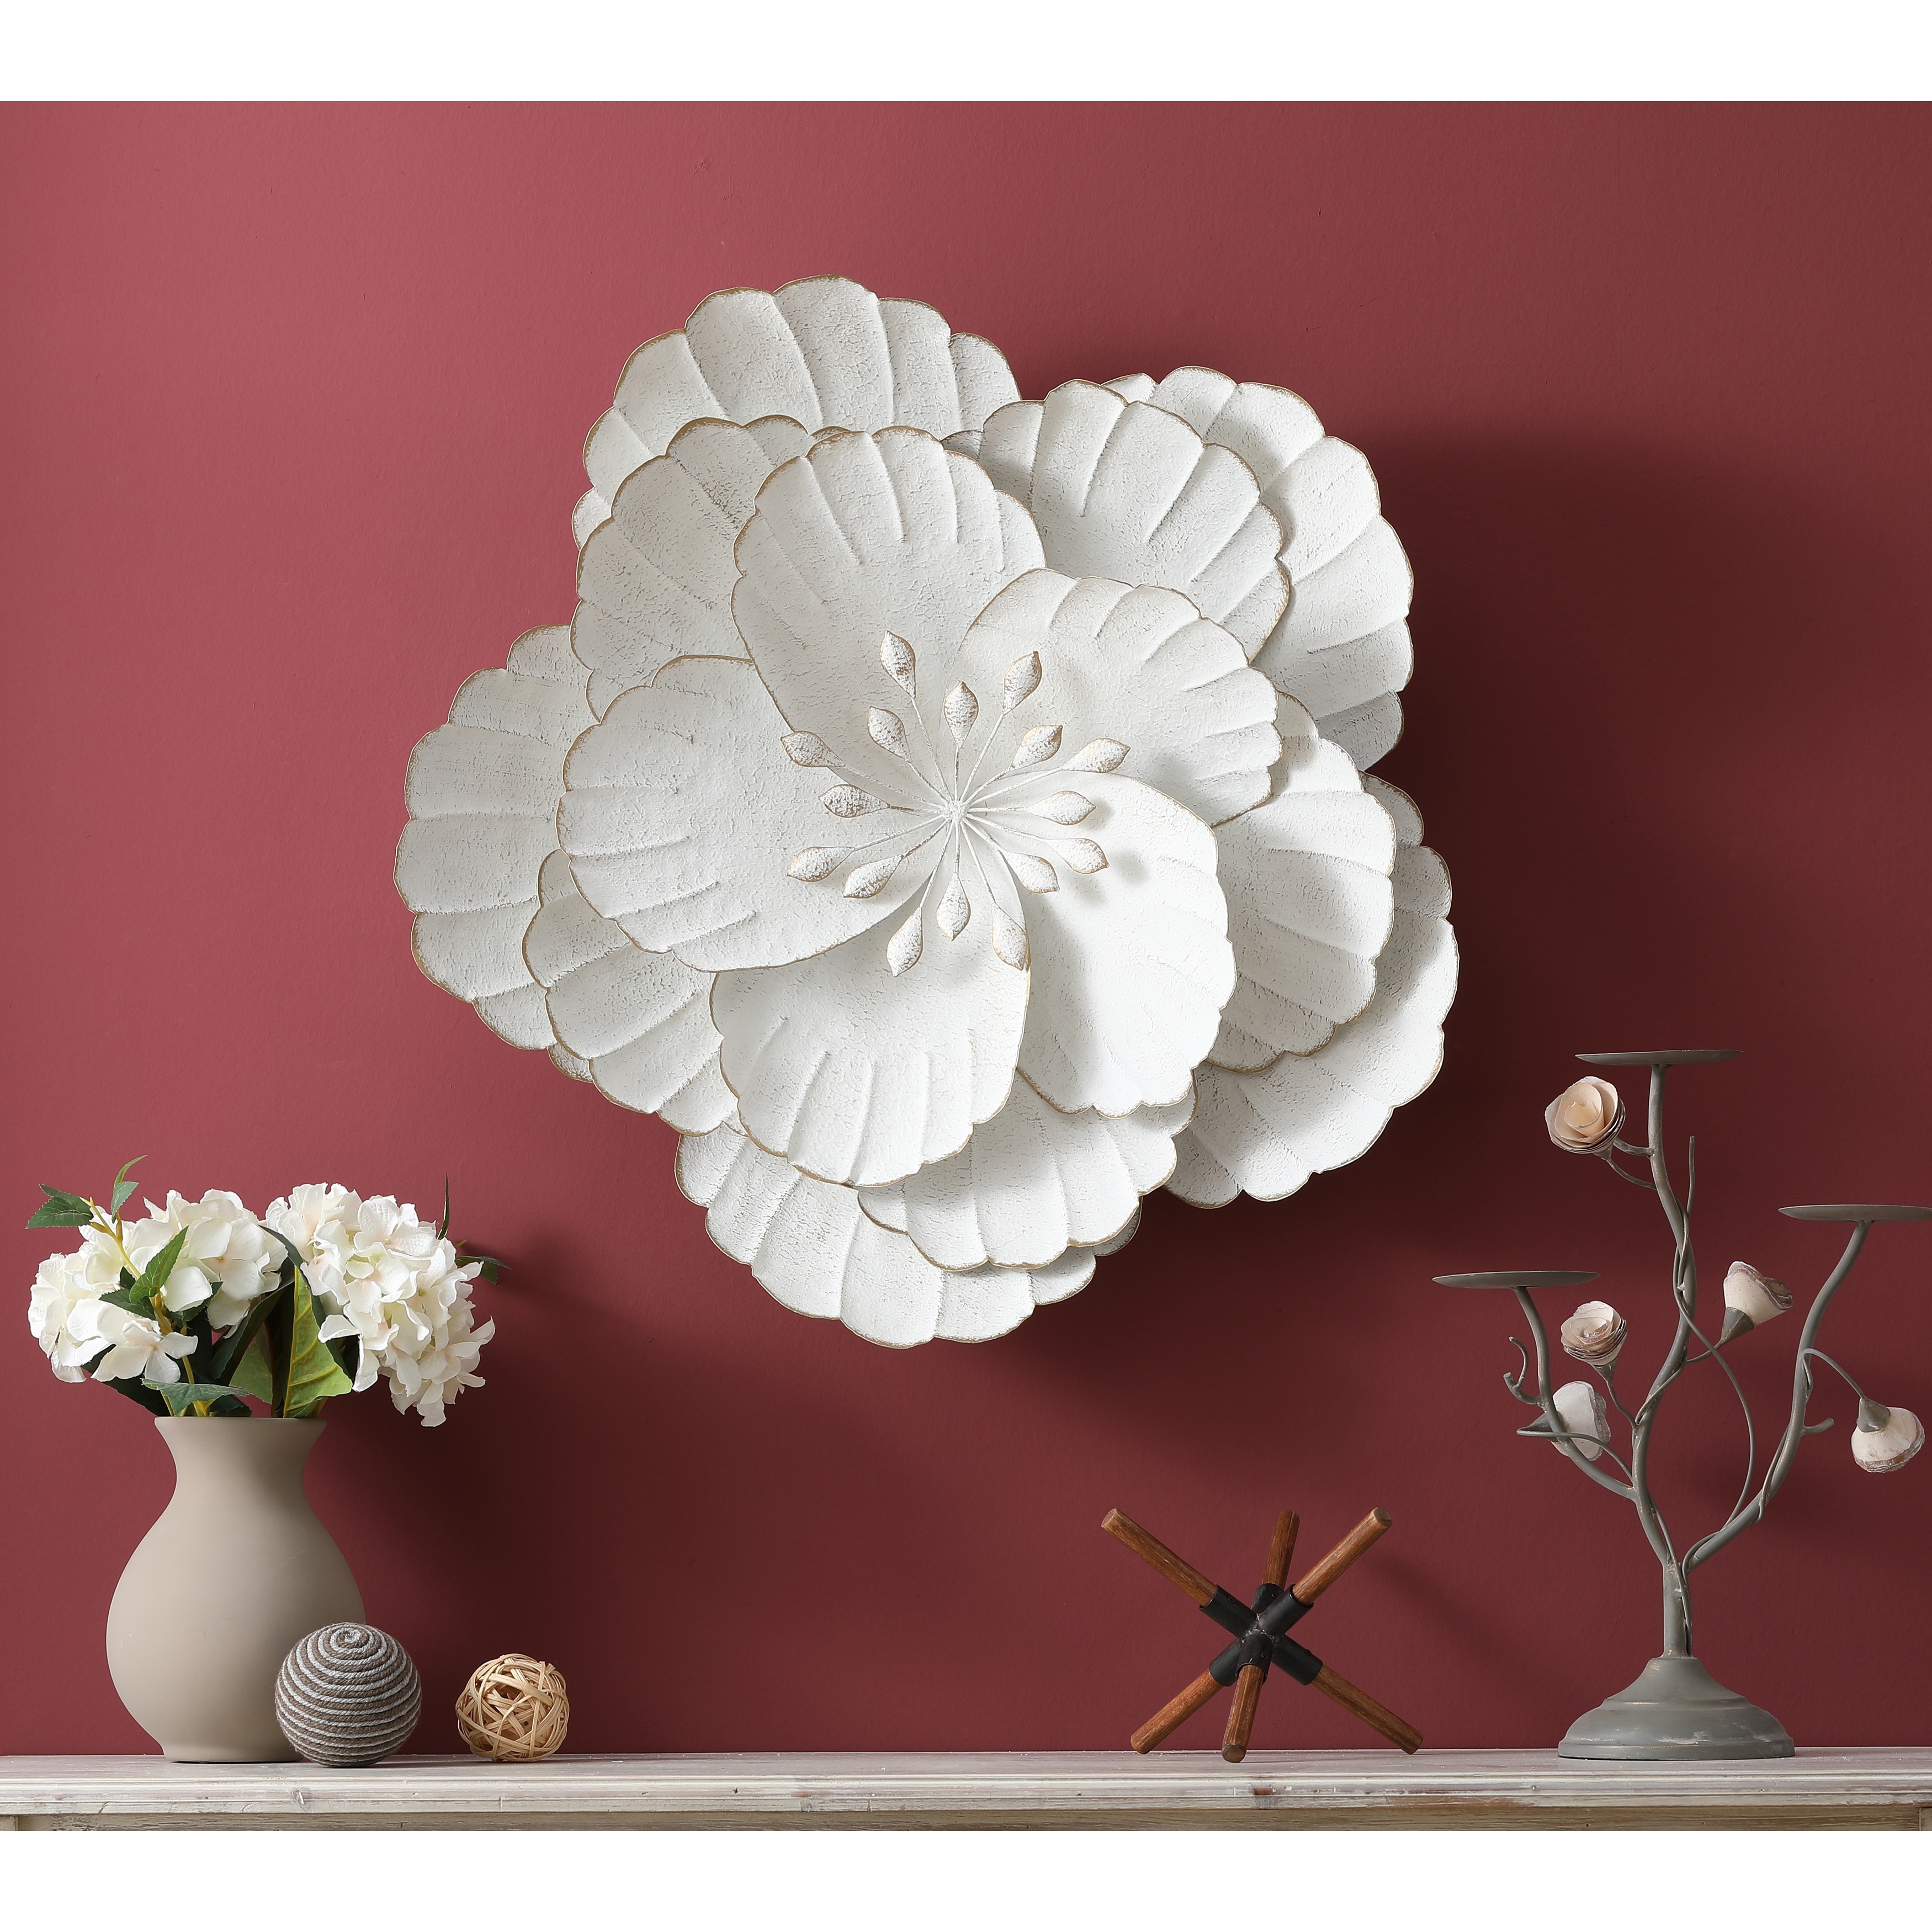 21-Inch Distressed White Metal Flower Wall Decor